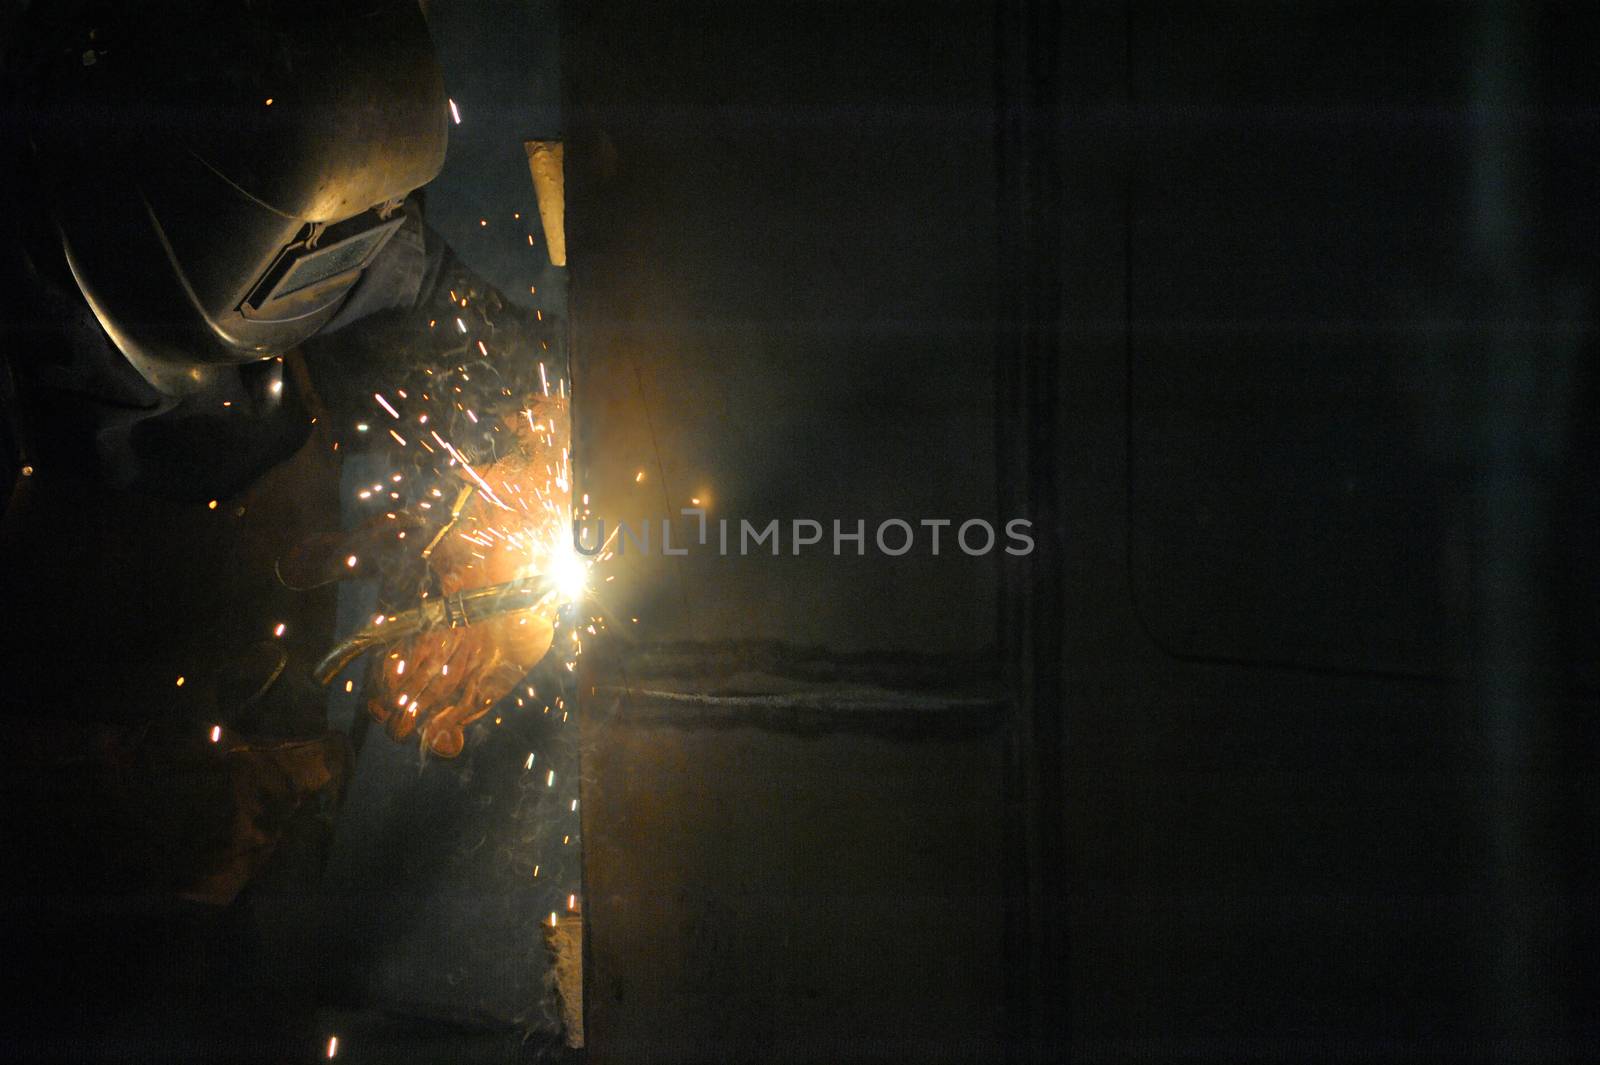 Worker With Protective Mask Welding Metal